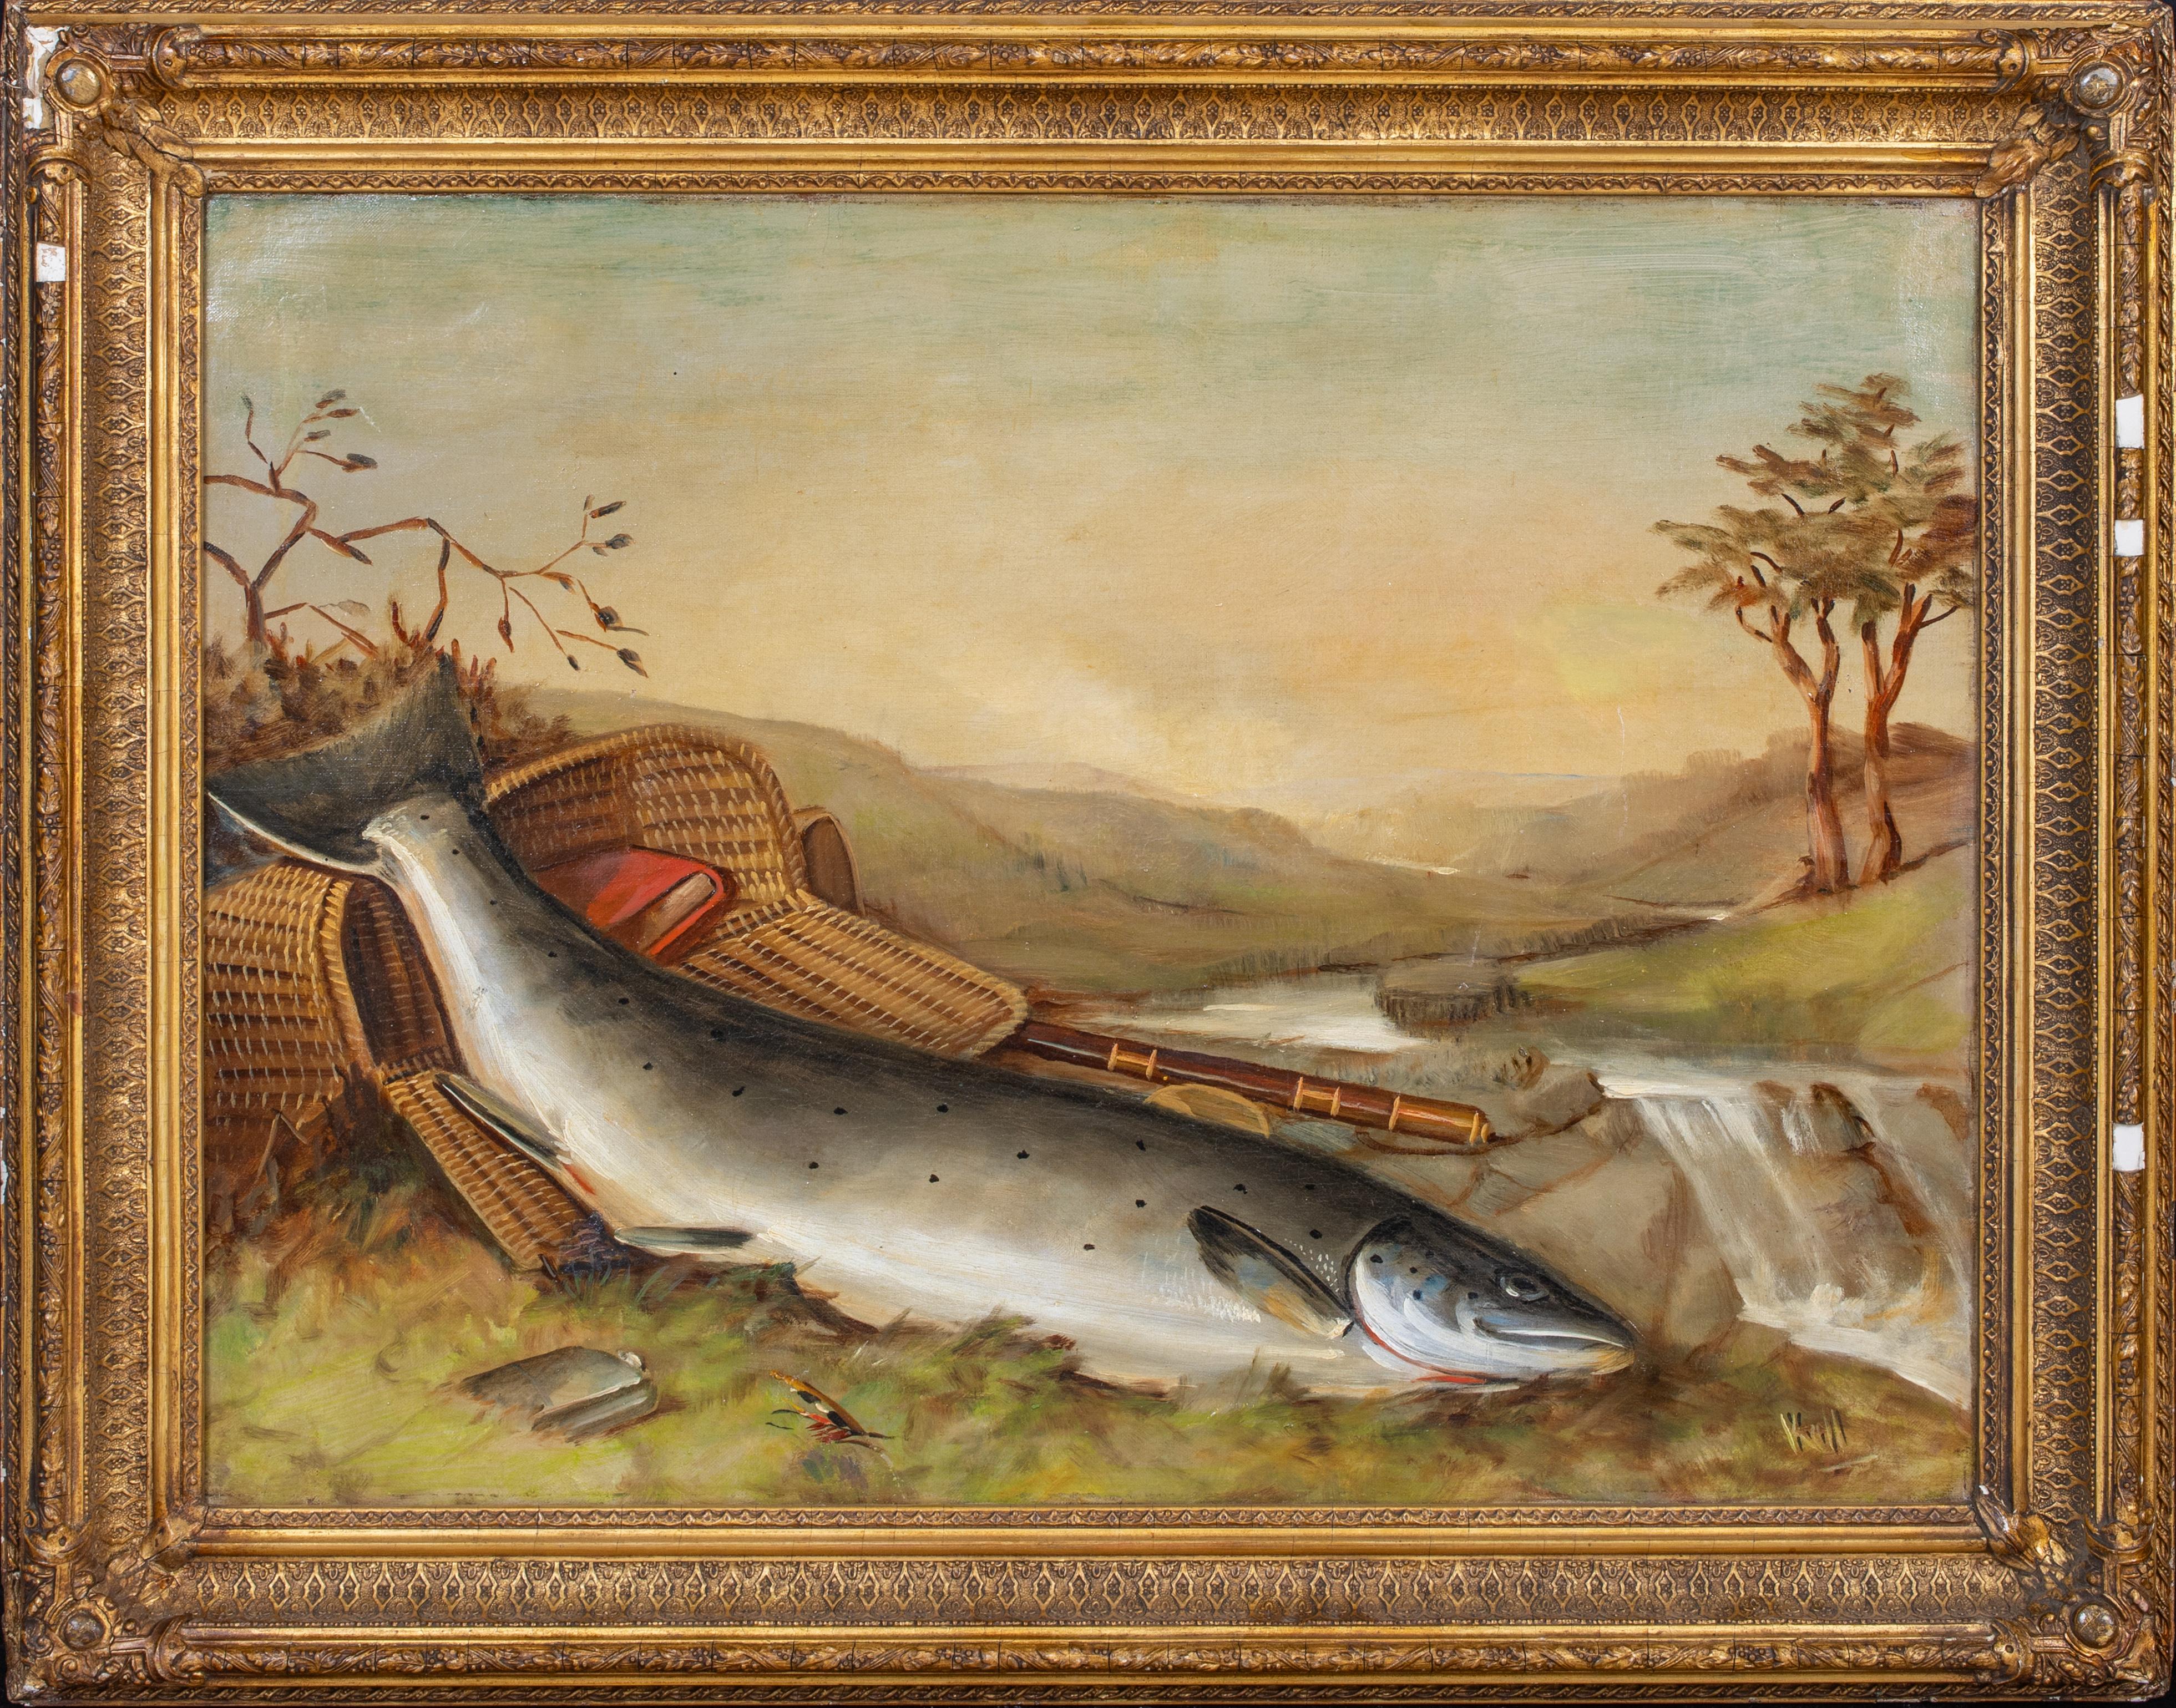 Unknown Still-Life Painting - Salmon On The Riverbank, 19th Century  by Robert Kell (1829-1902)